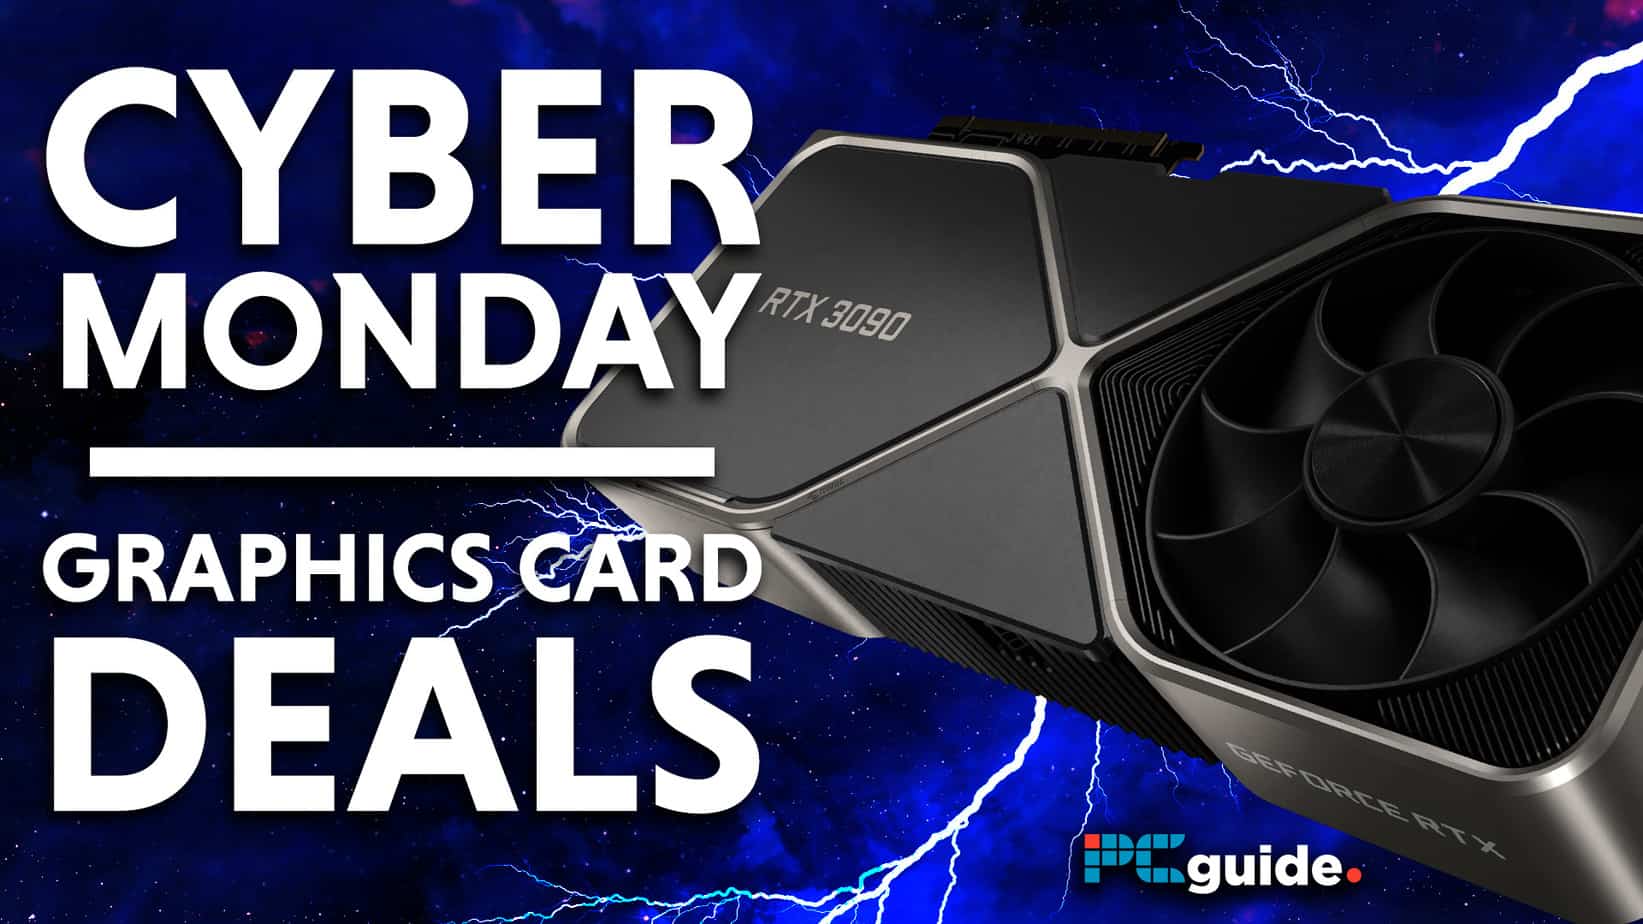 Best Cyber Monday Deals In 2021 - PC Guide